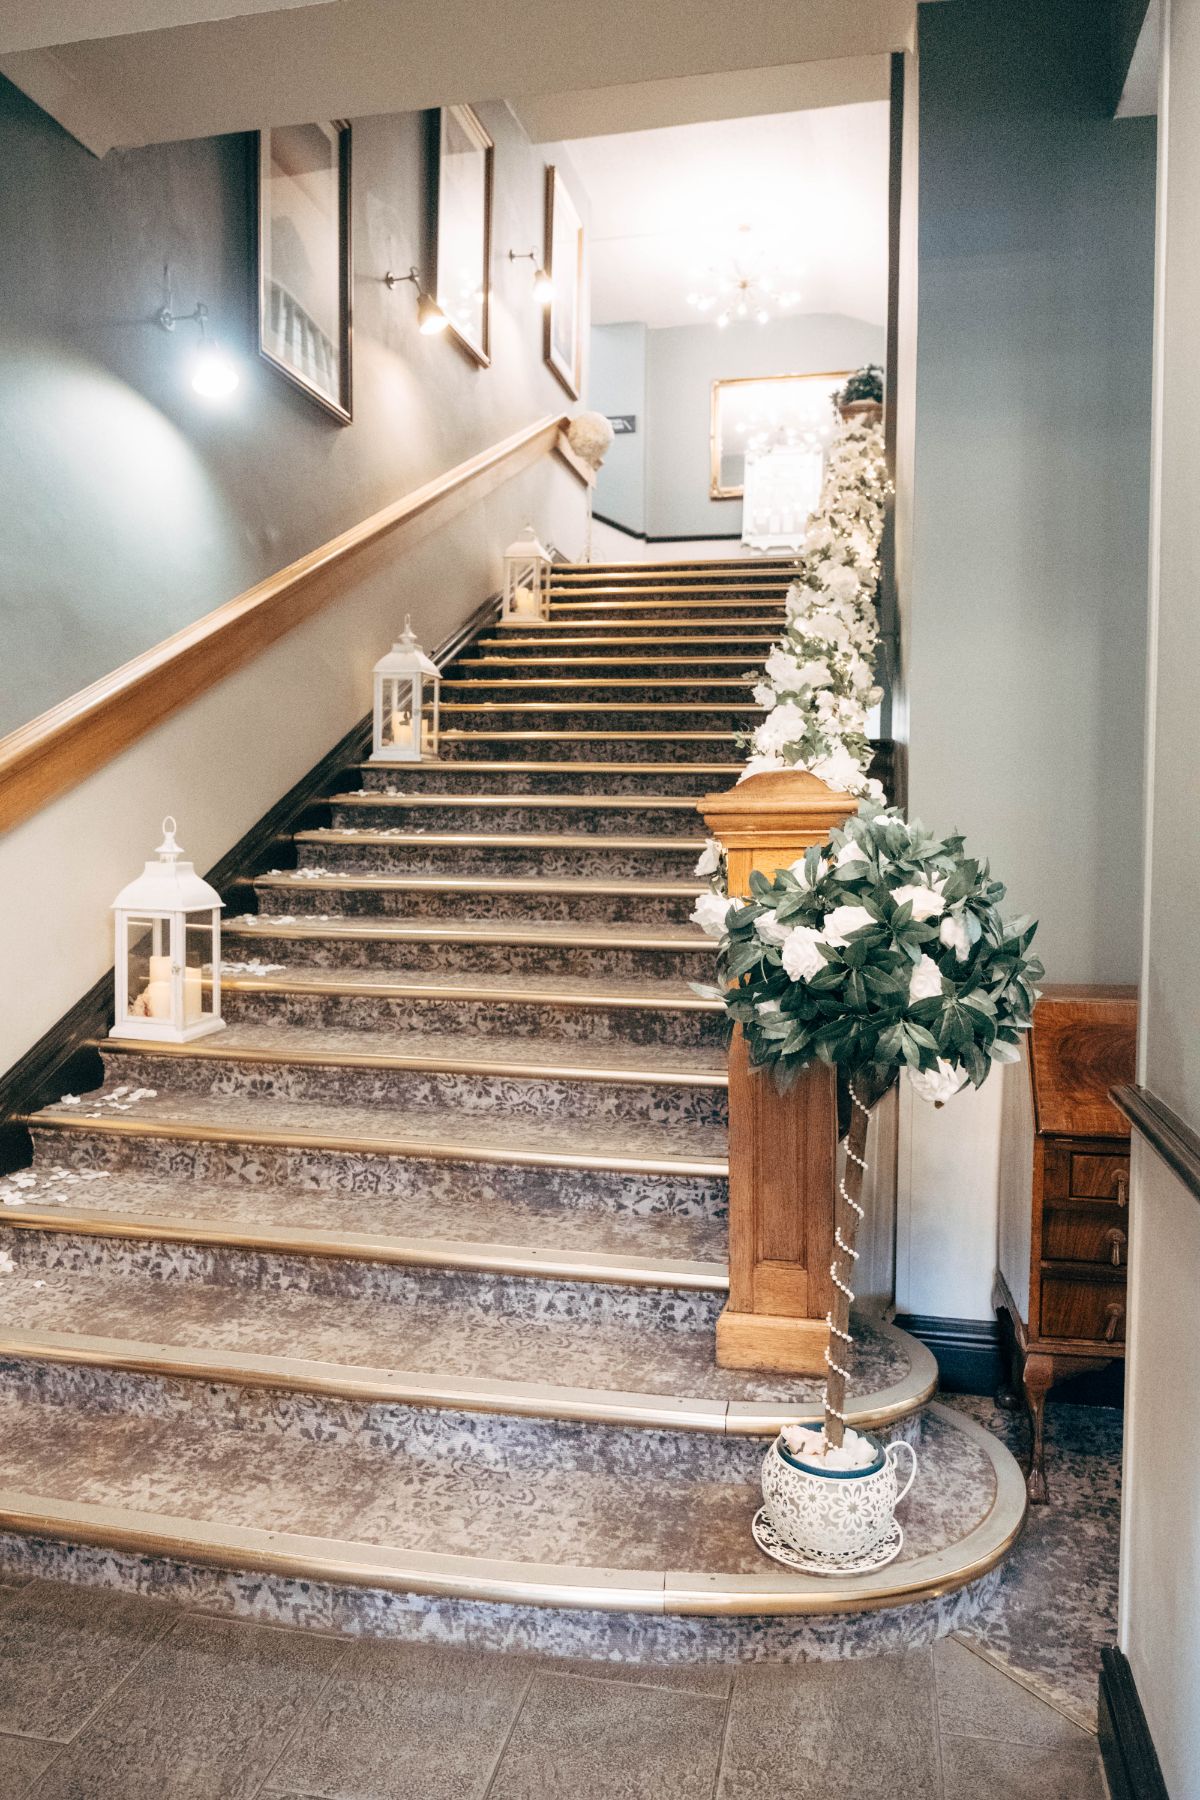 Our main stairway decorated for the wedding